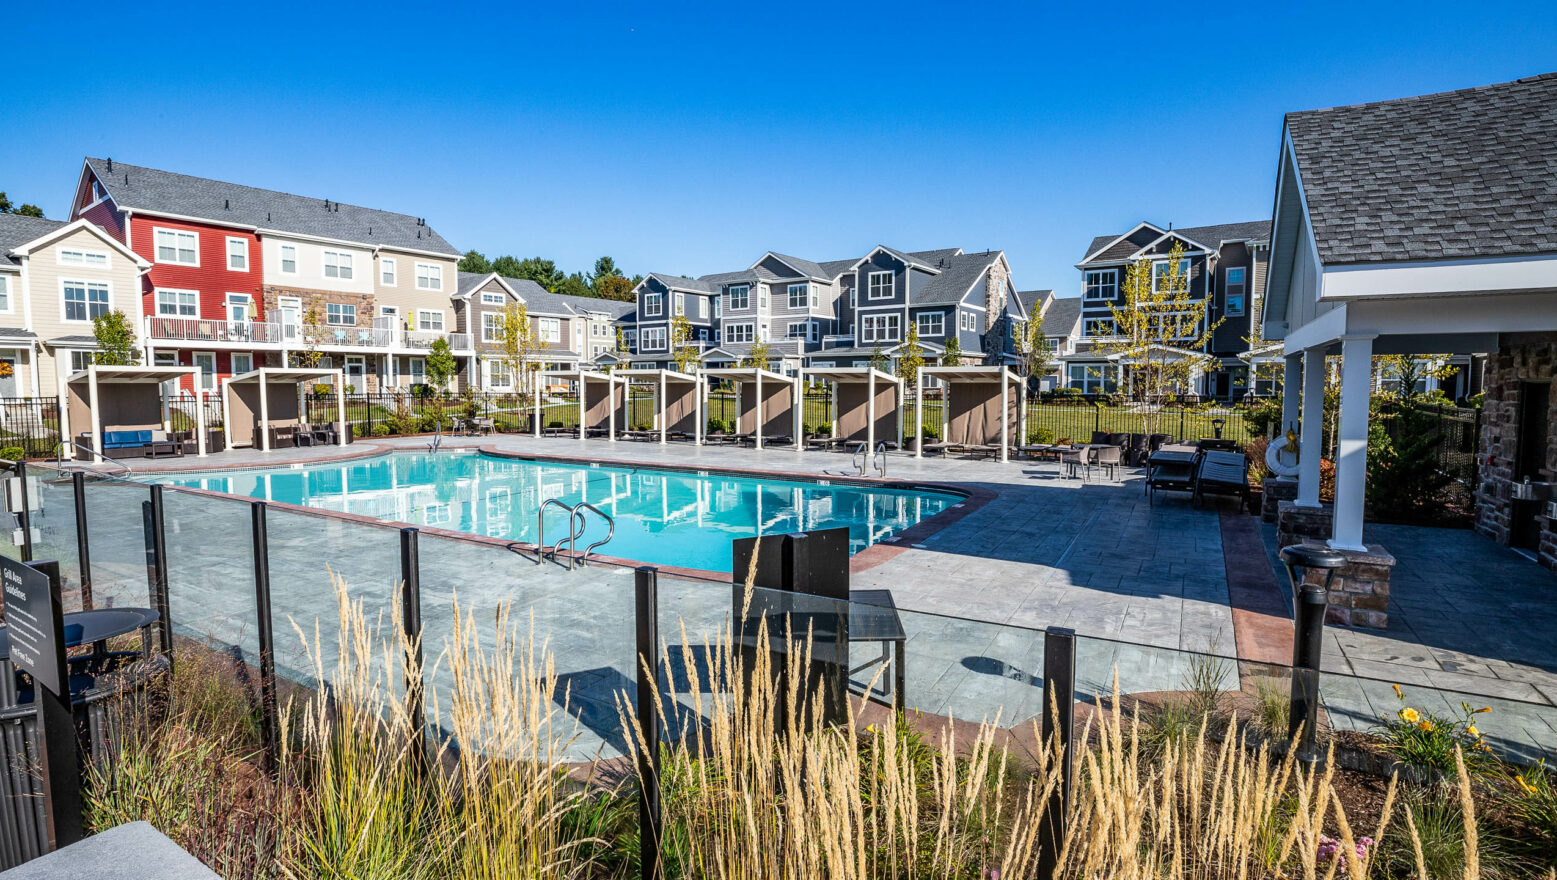 Stamped & colored concrete pool deck at the Avalon apartment complex in MA. Dex by Terra commercial hardscape project.